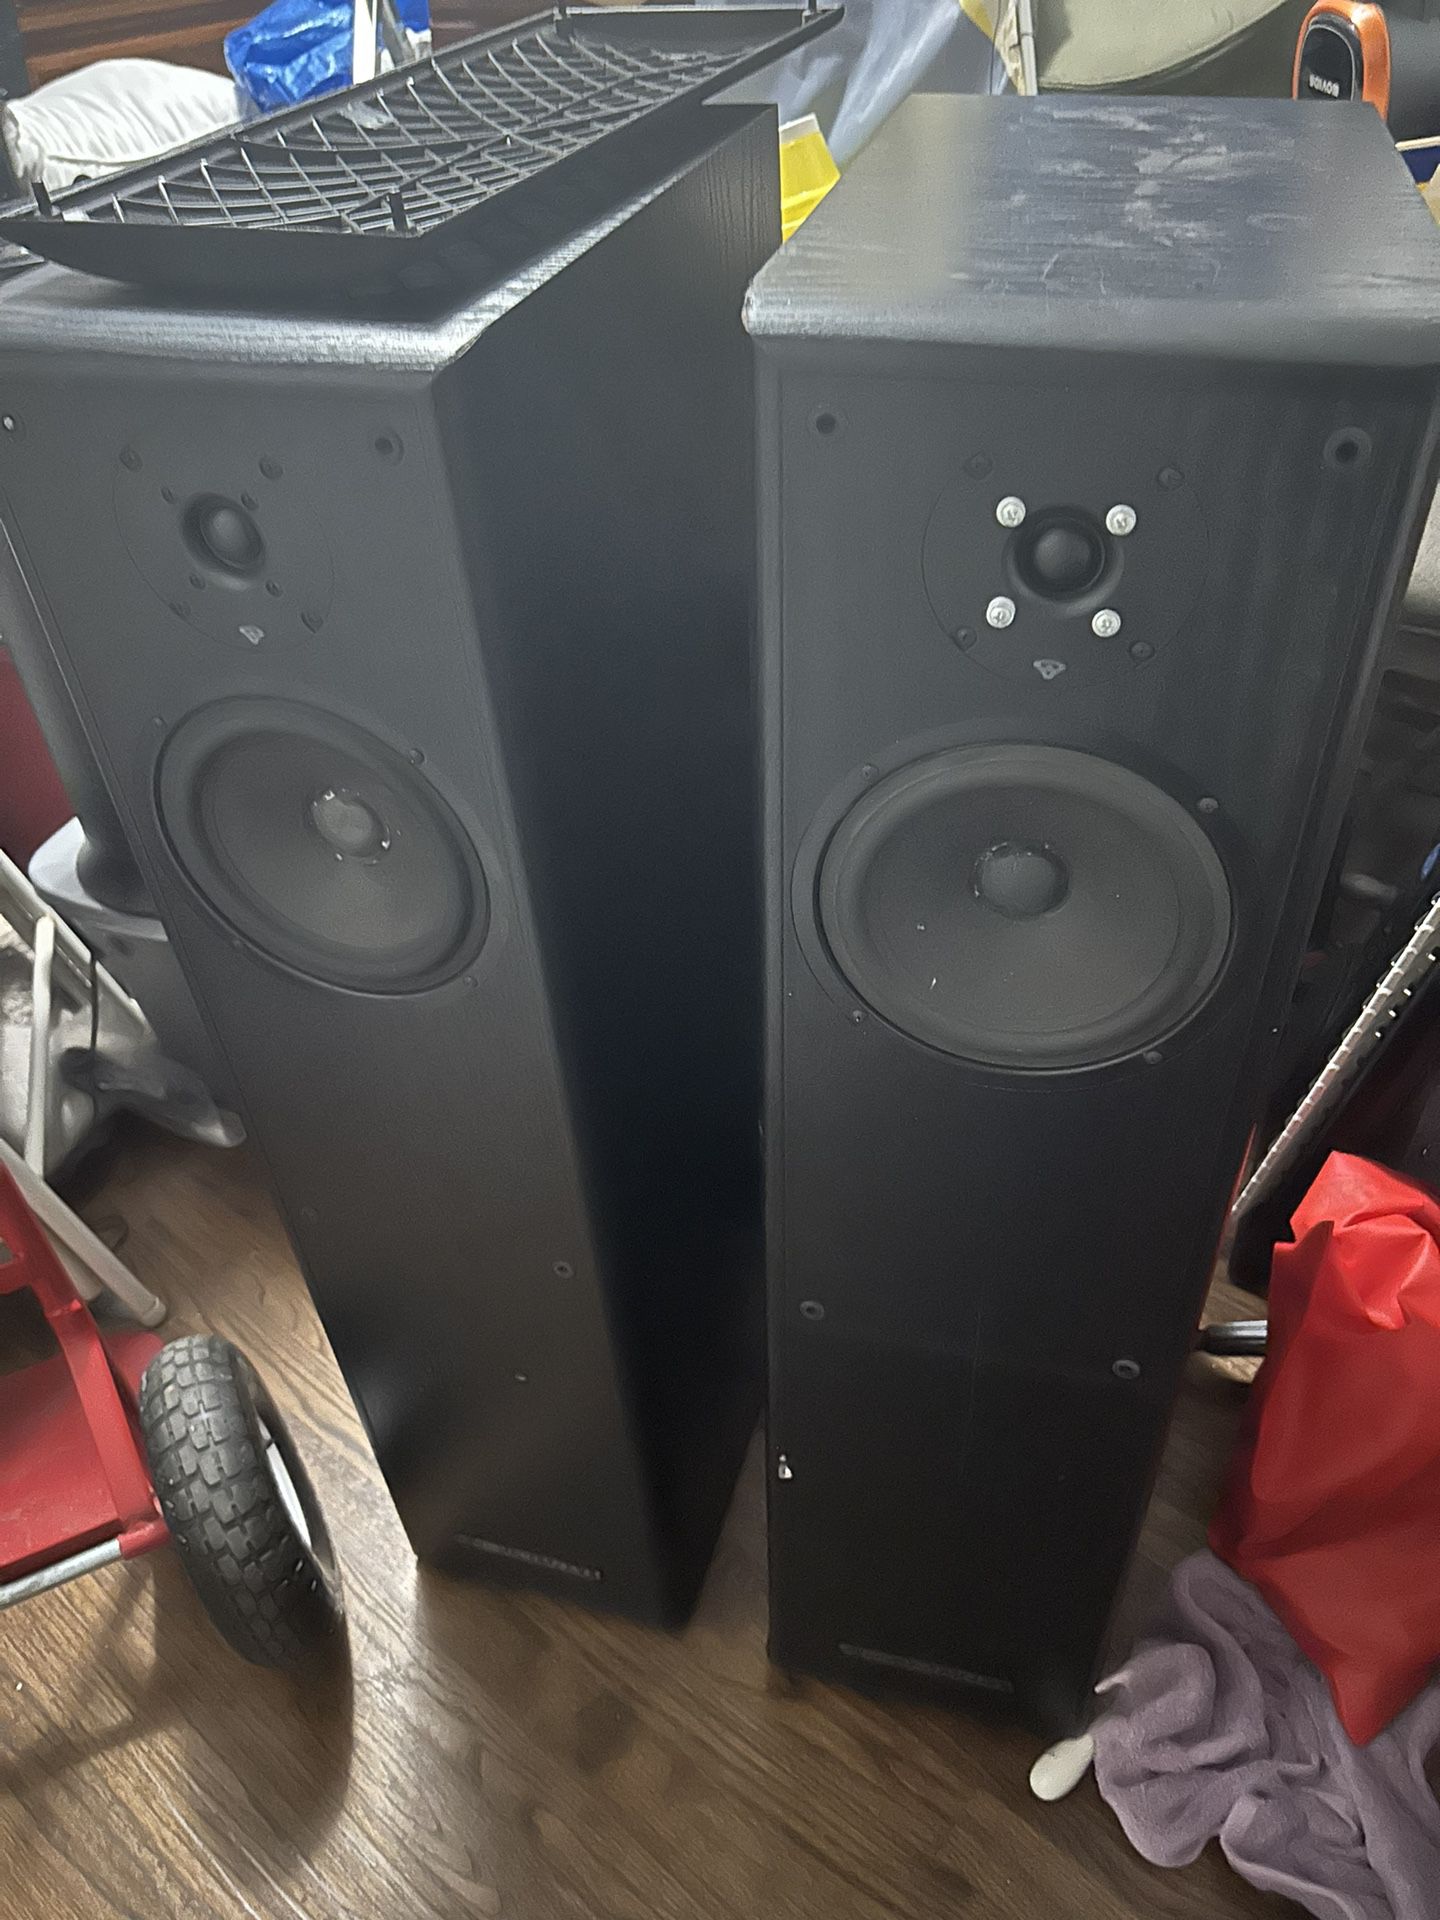 Cerwin Vega CVT-100 Tower Speakers Cosmetically Ruff But Sound Amazing Asking 275 For Pair Bring Ur Own Receiver To Test Make Offer 